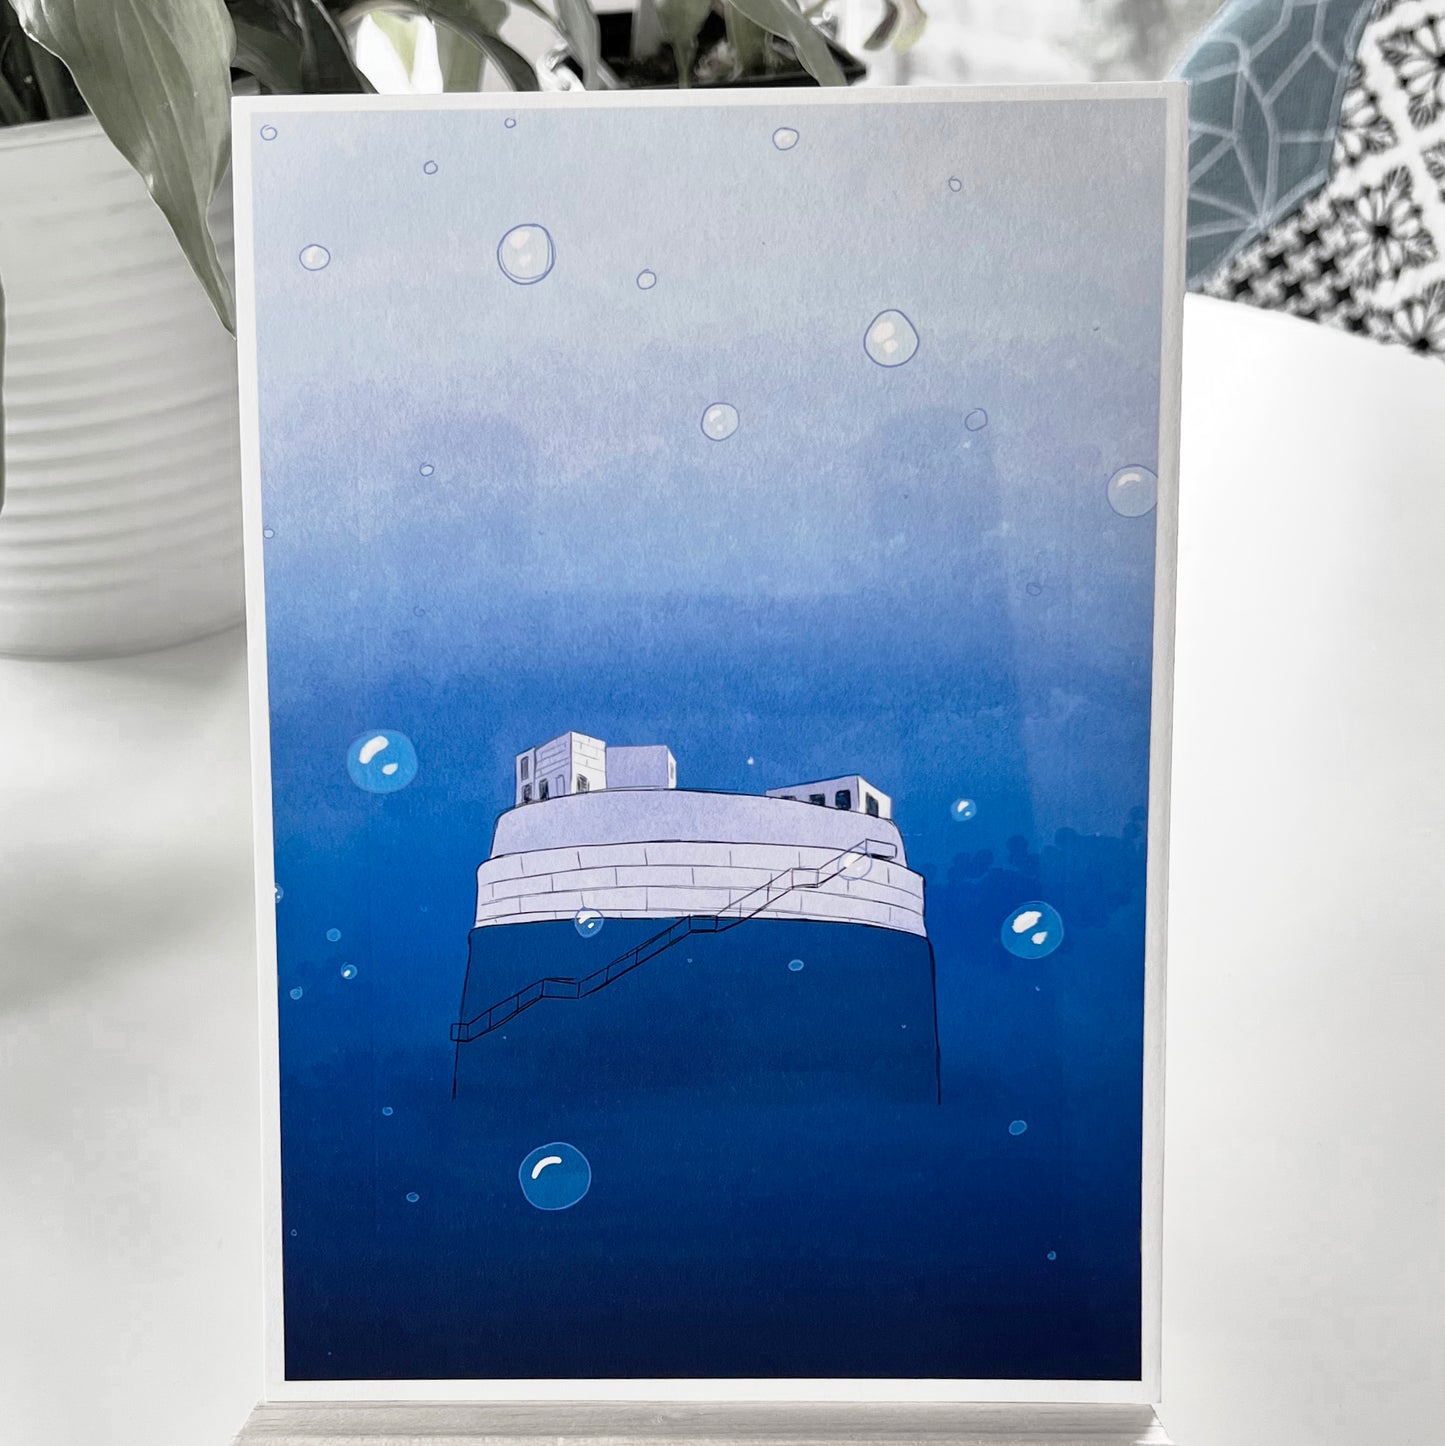 Water Fort Glicée Print